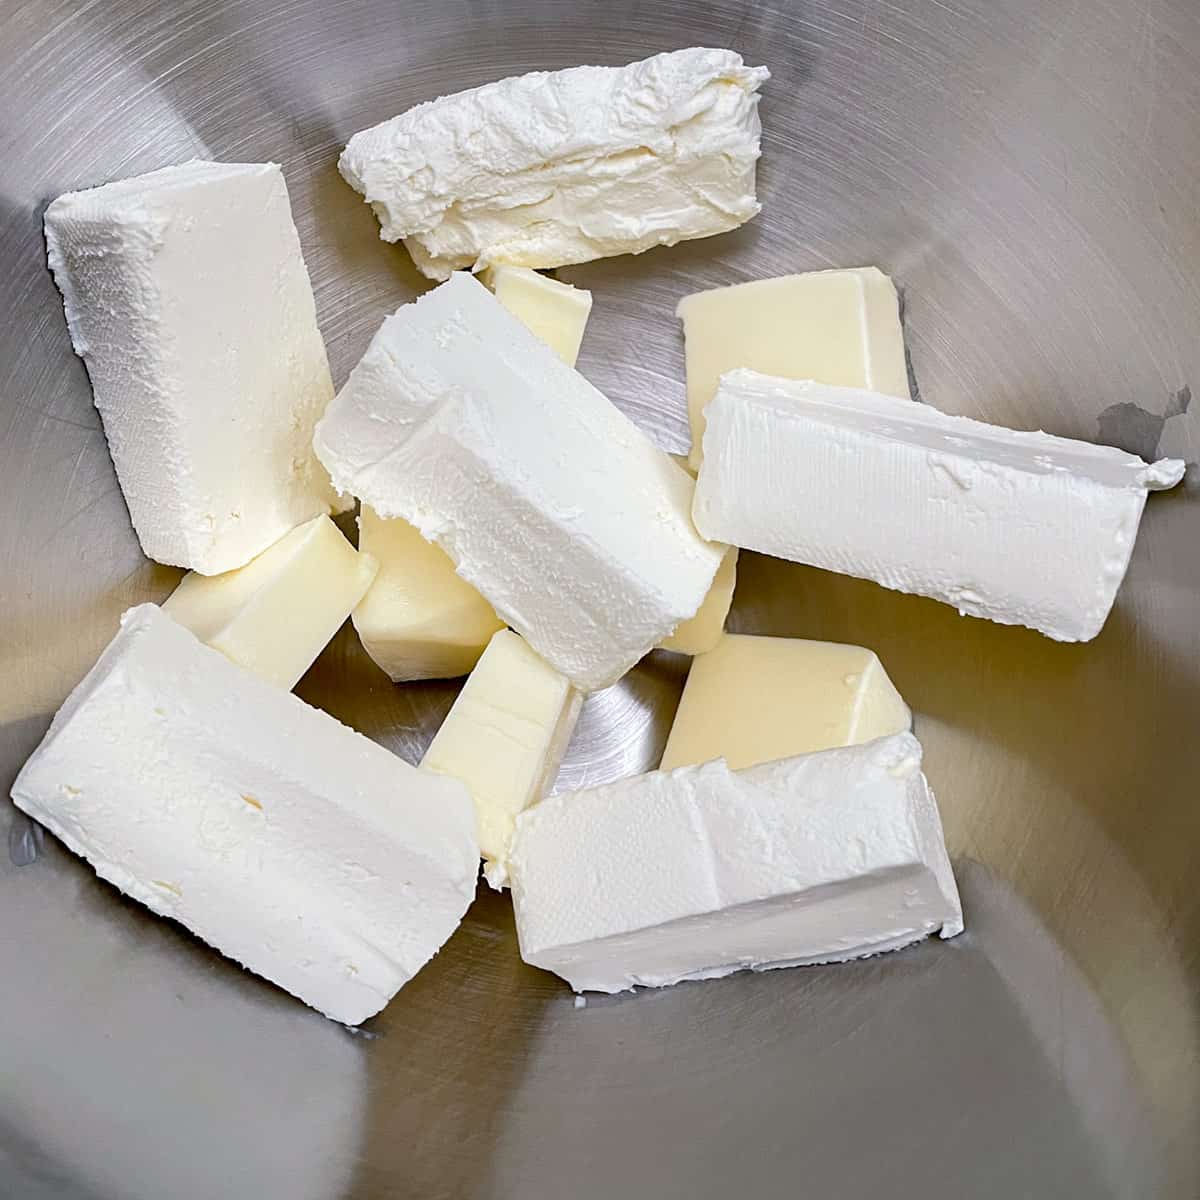 Cutting up butter and cream cheese into a mixer bowl.